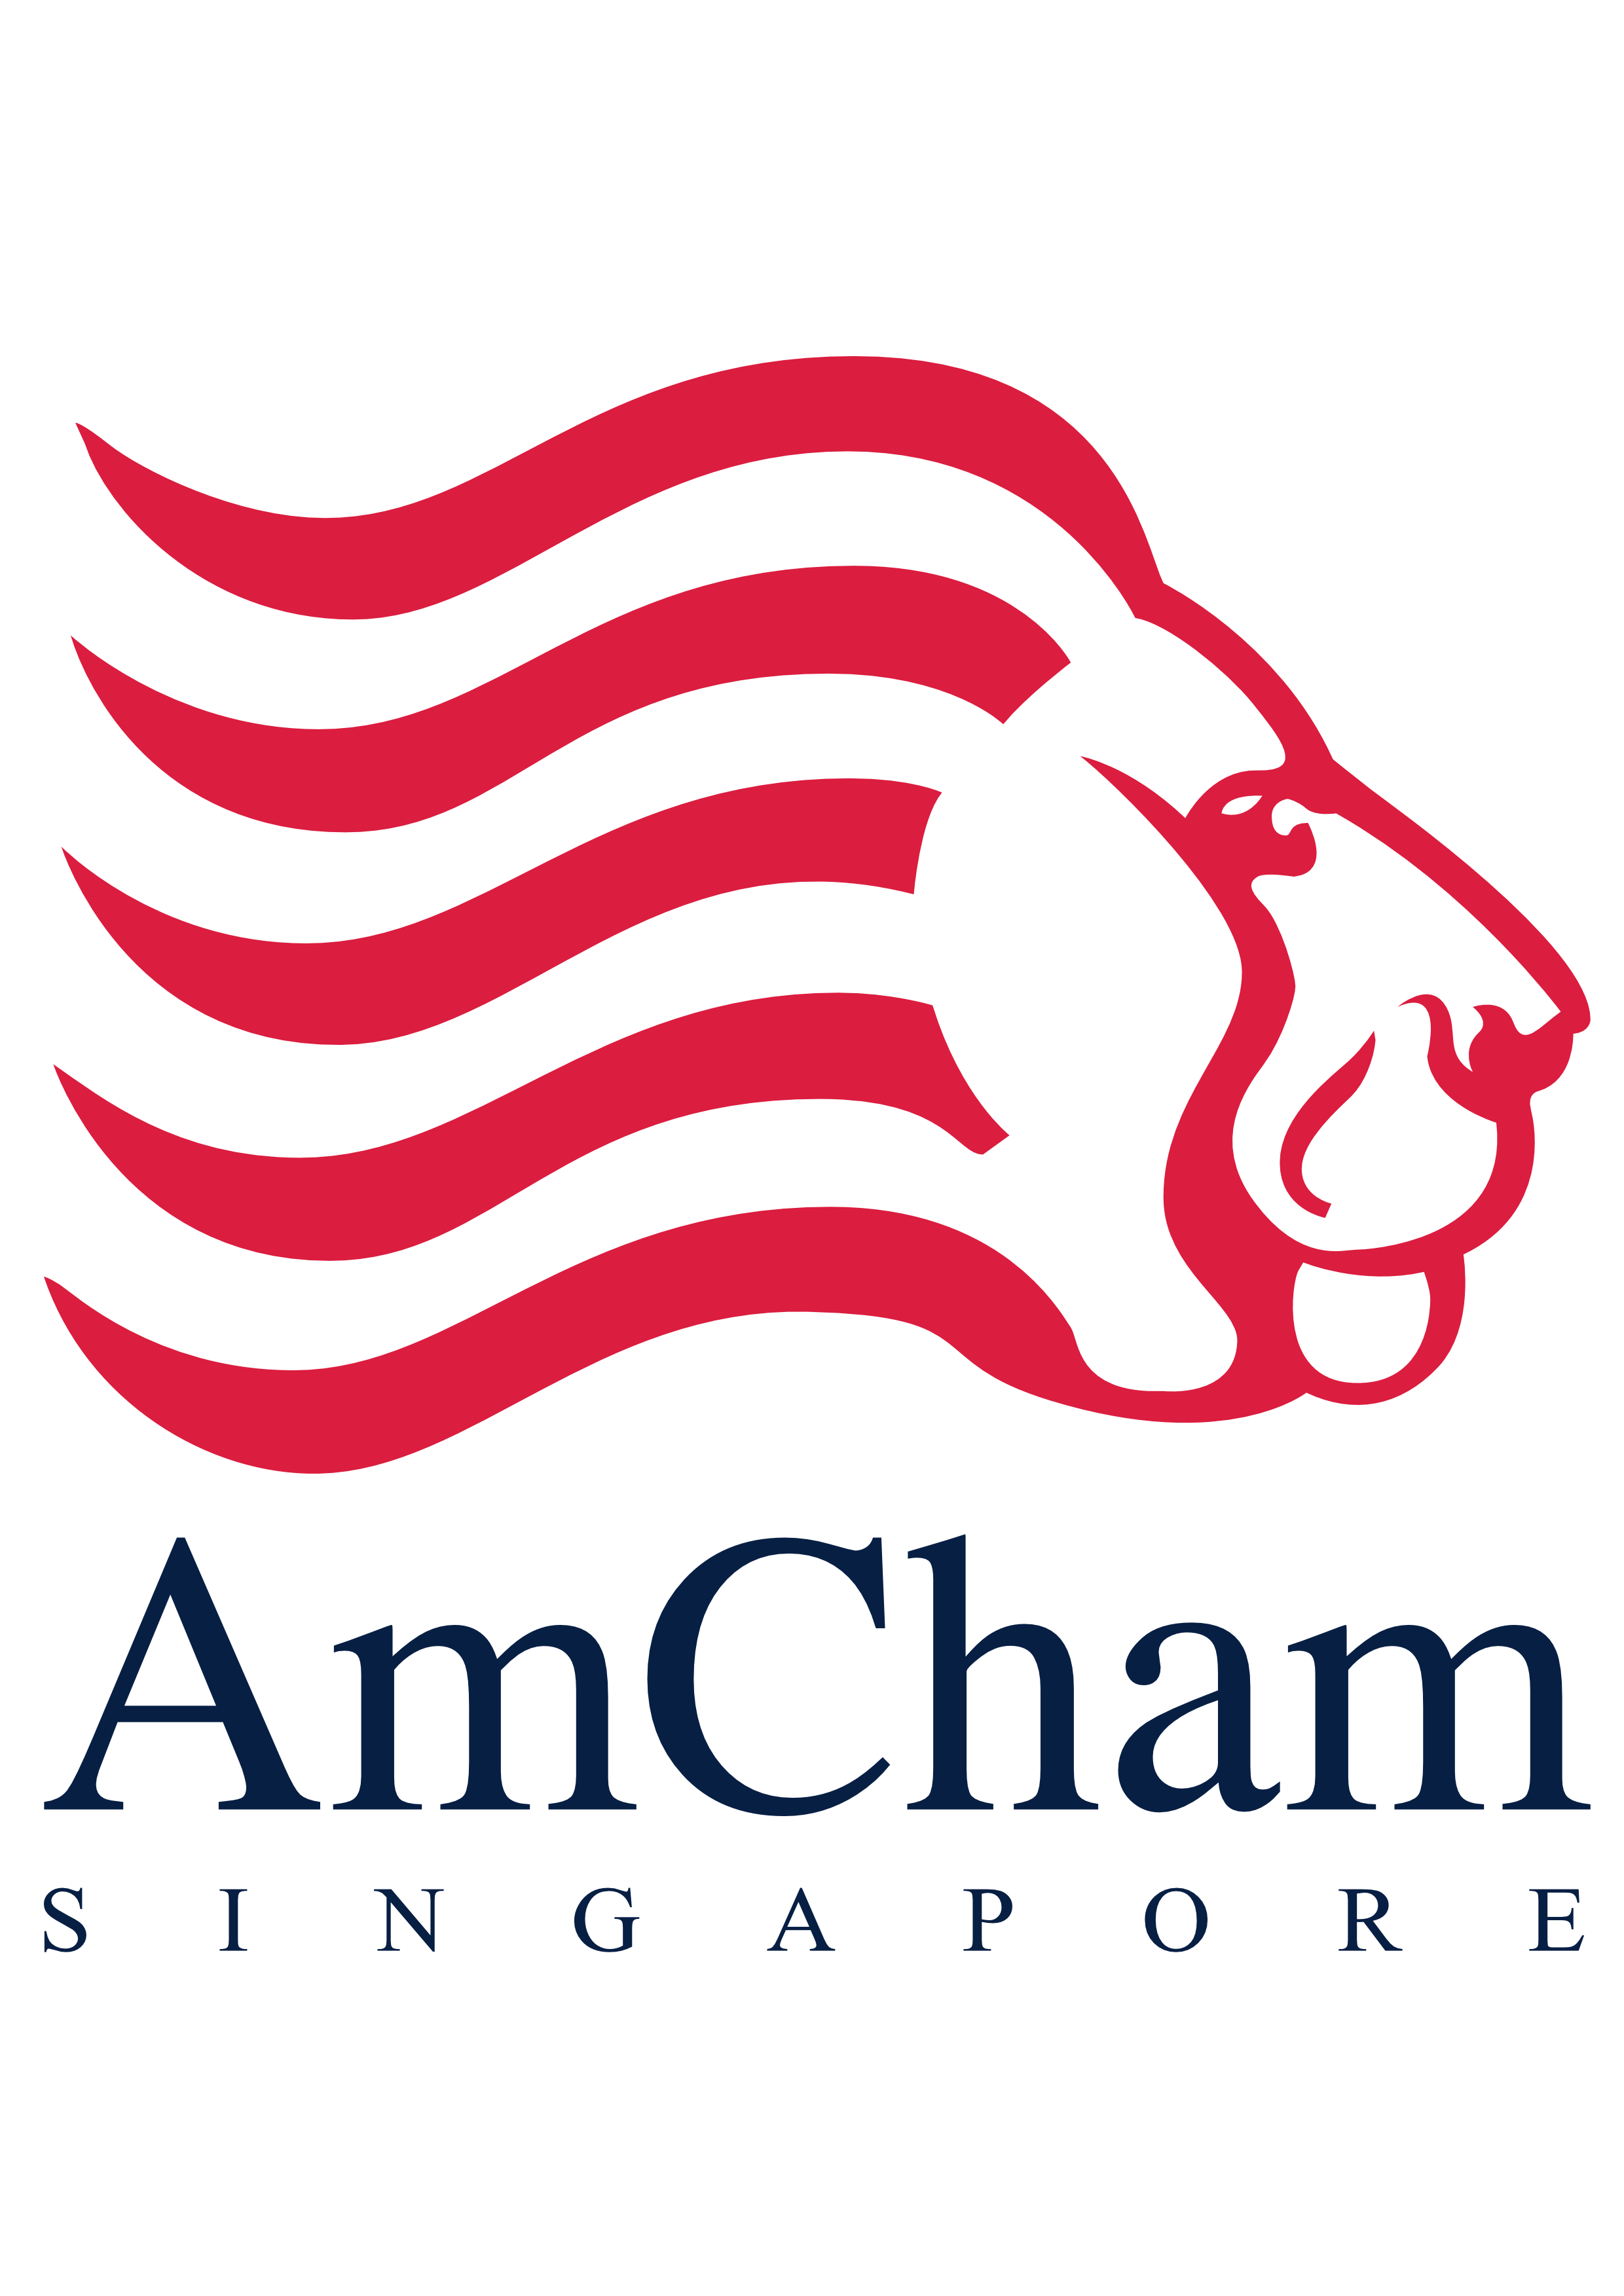 The American Chamber of Commerce in Singapore